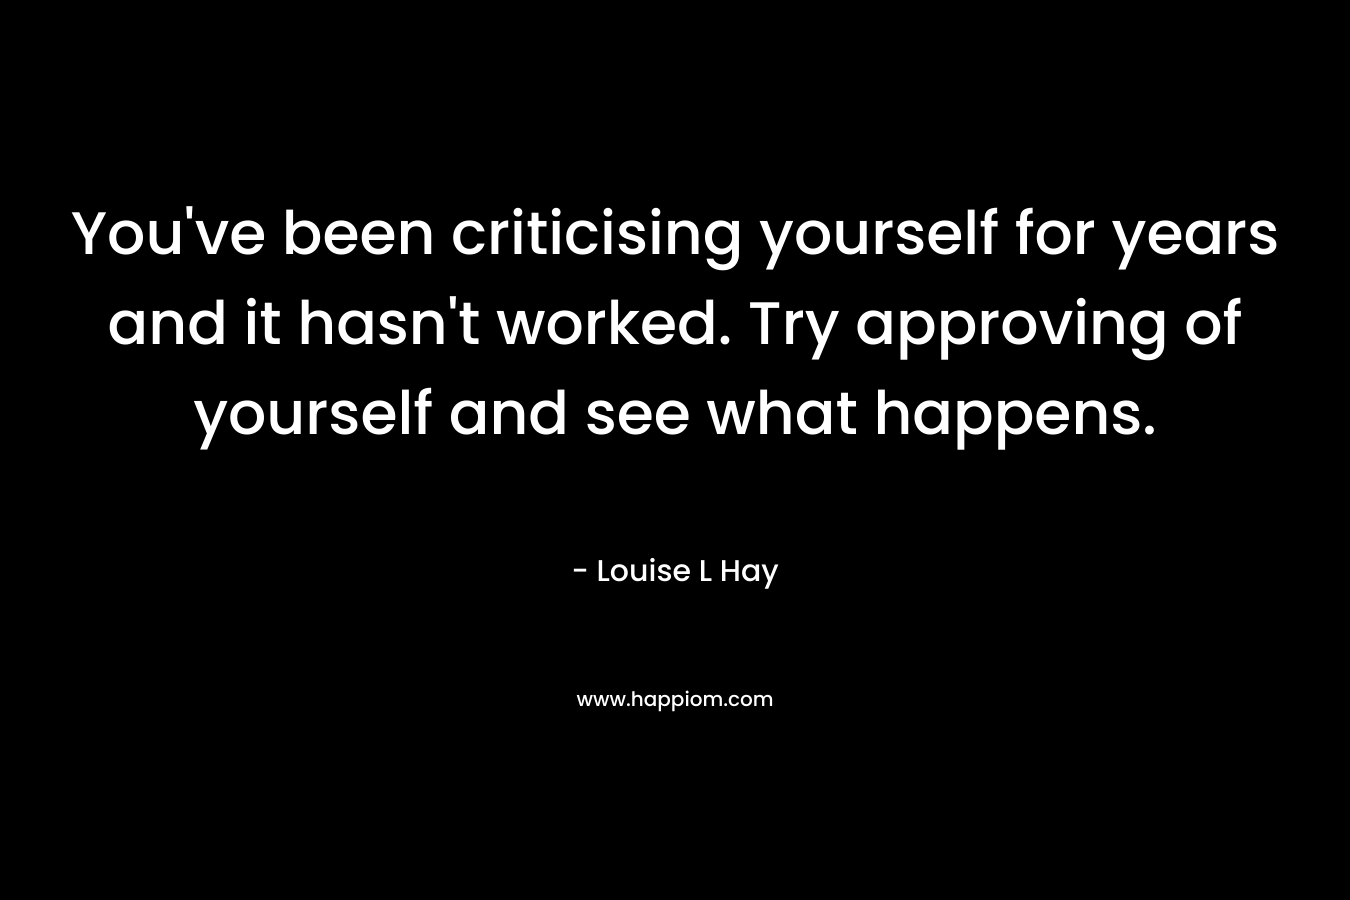 You’ve been criticising yourself for years and it hasn’t worked. Try approving of yourself and see what happens. – Louise L Hay